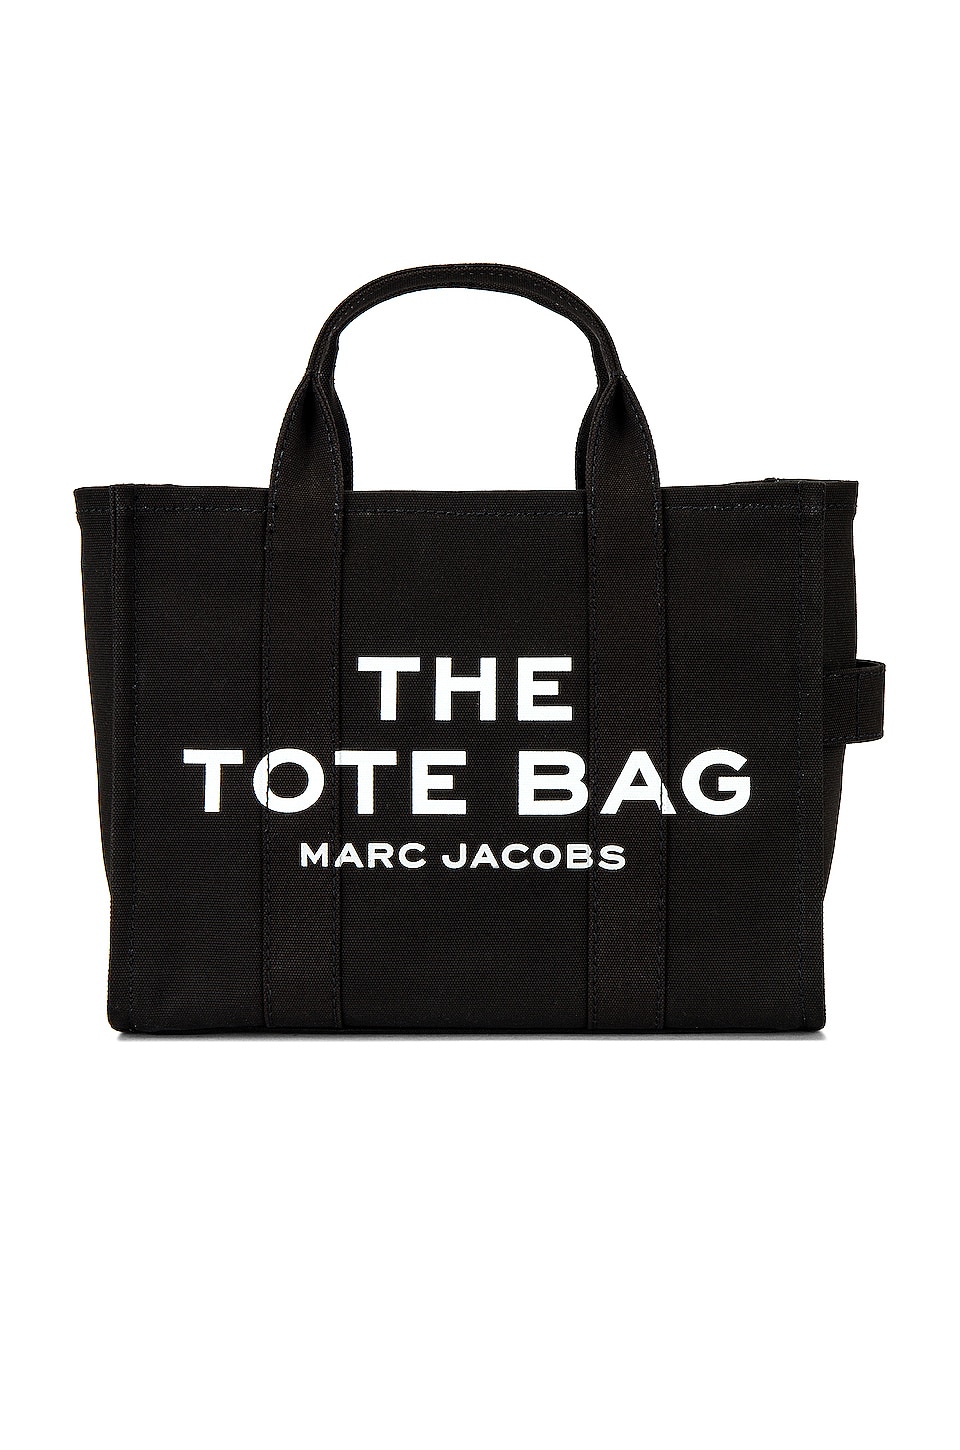 Sicily switch Decode Marc Jacobs The Medium Tote Bag in Black | REVOLVE